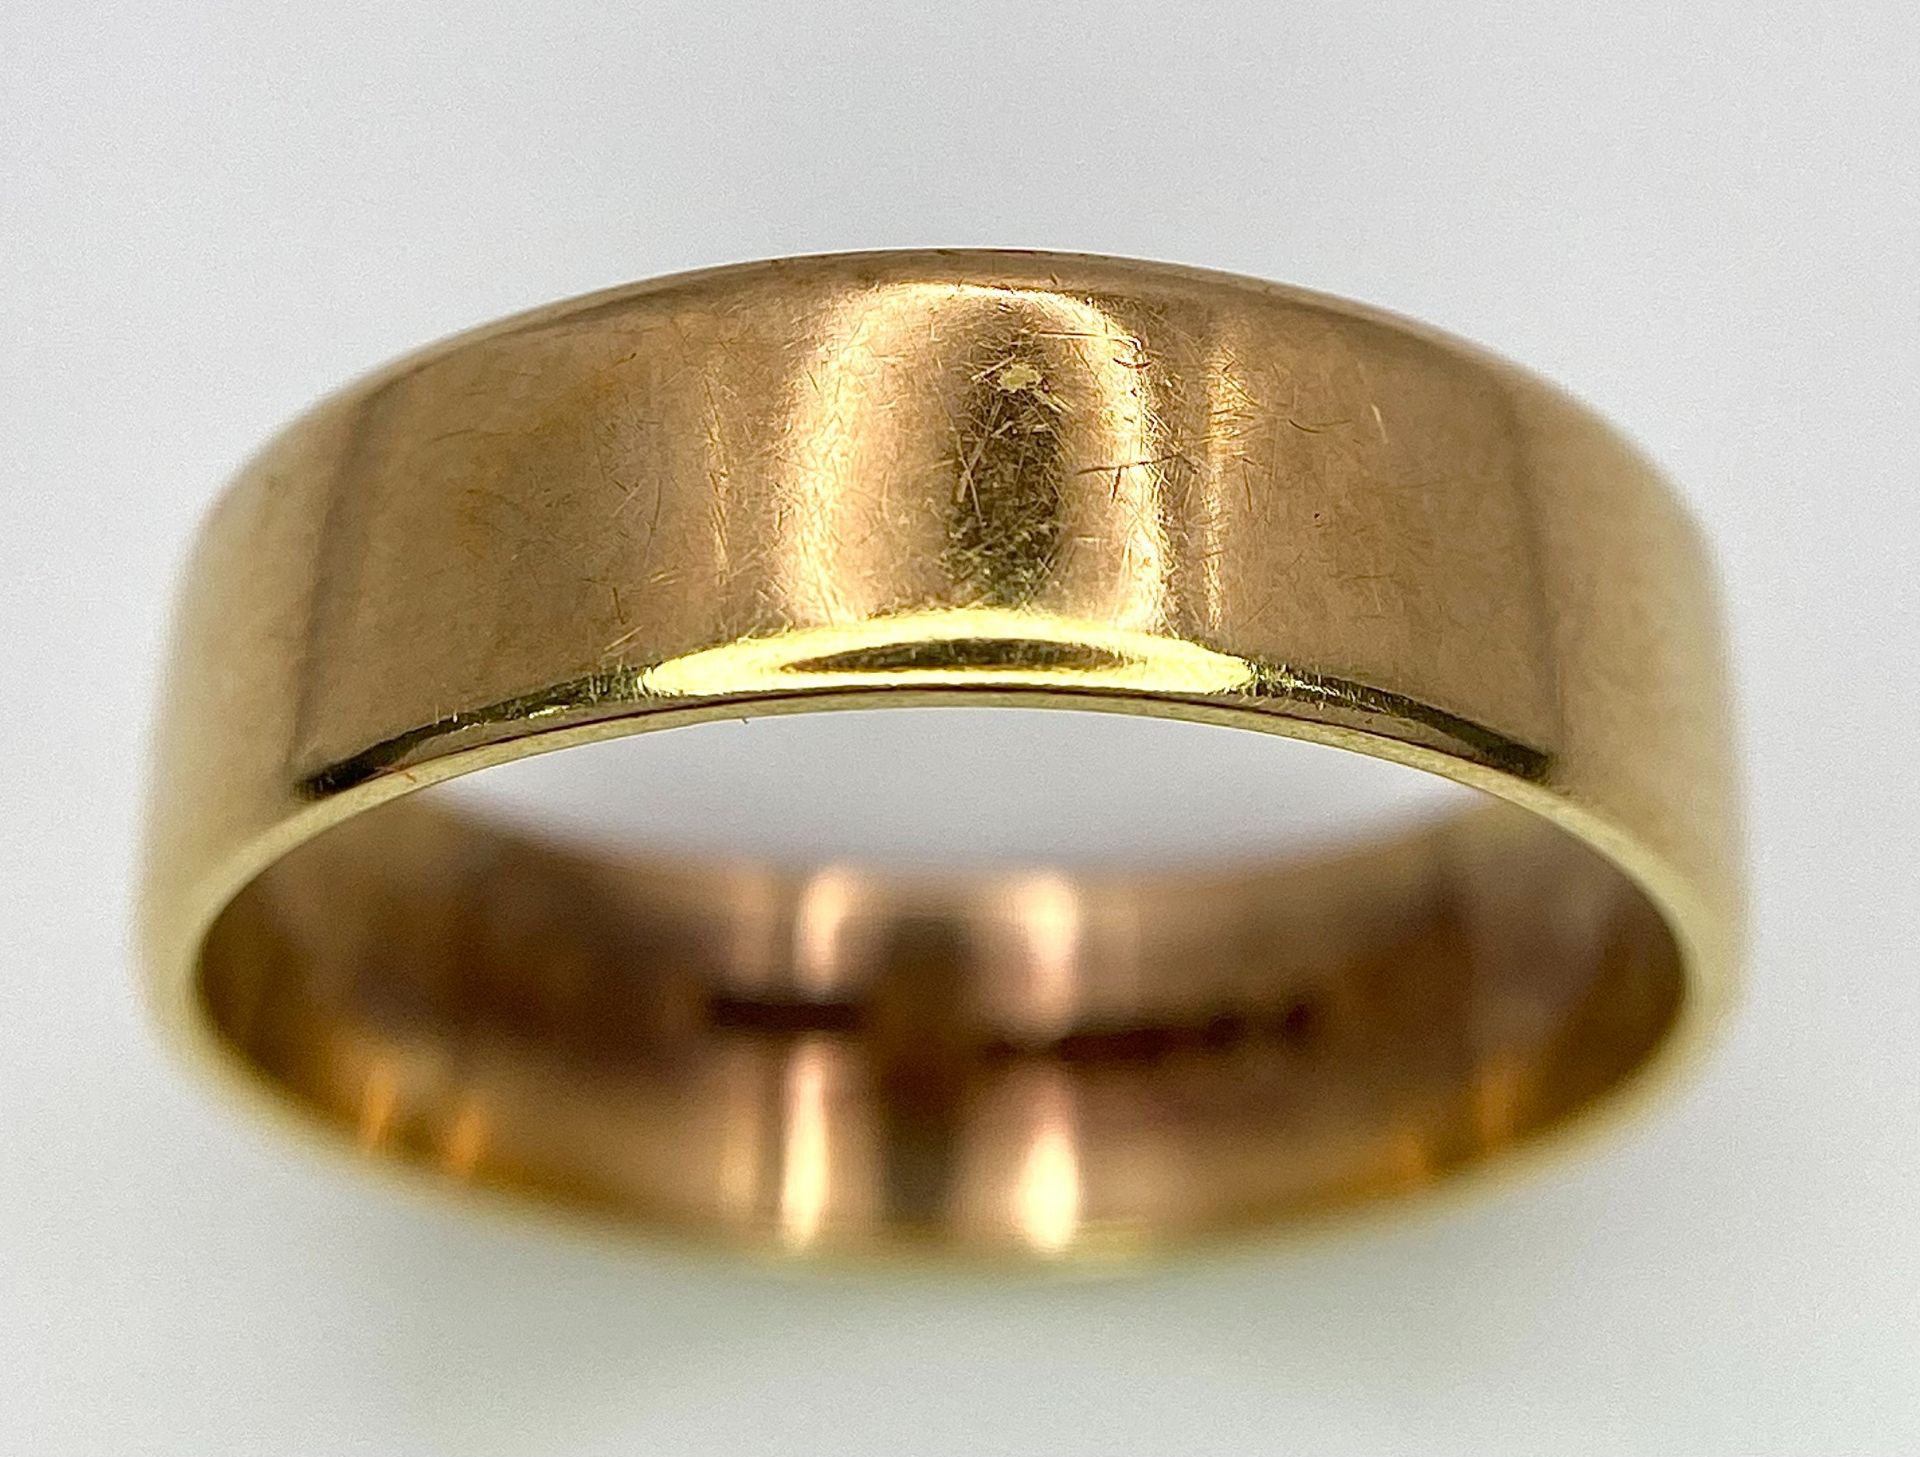 A Vintage 9K Yellow Gold Band Ring. 5mm width. 3.6g weight. Full UK hallmarks. - Image 2 of 6